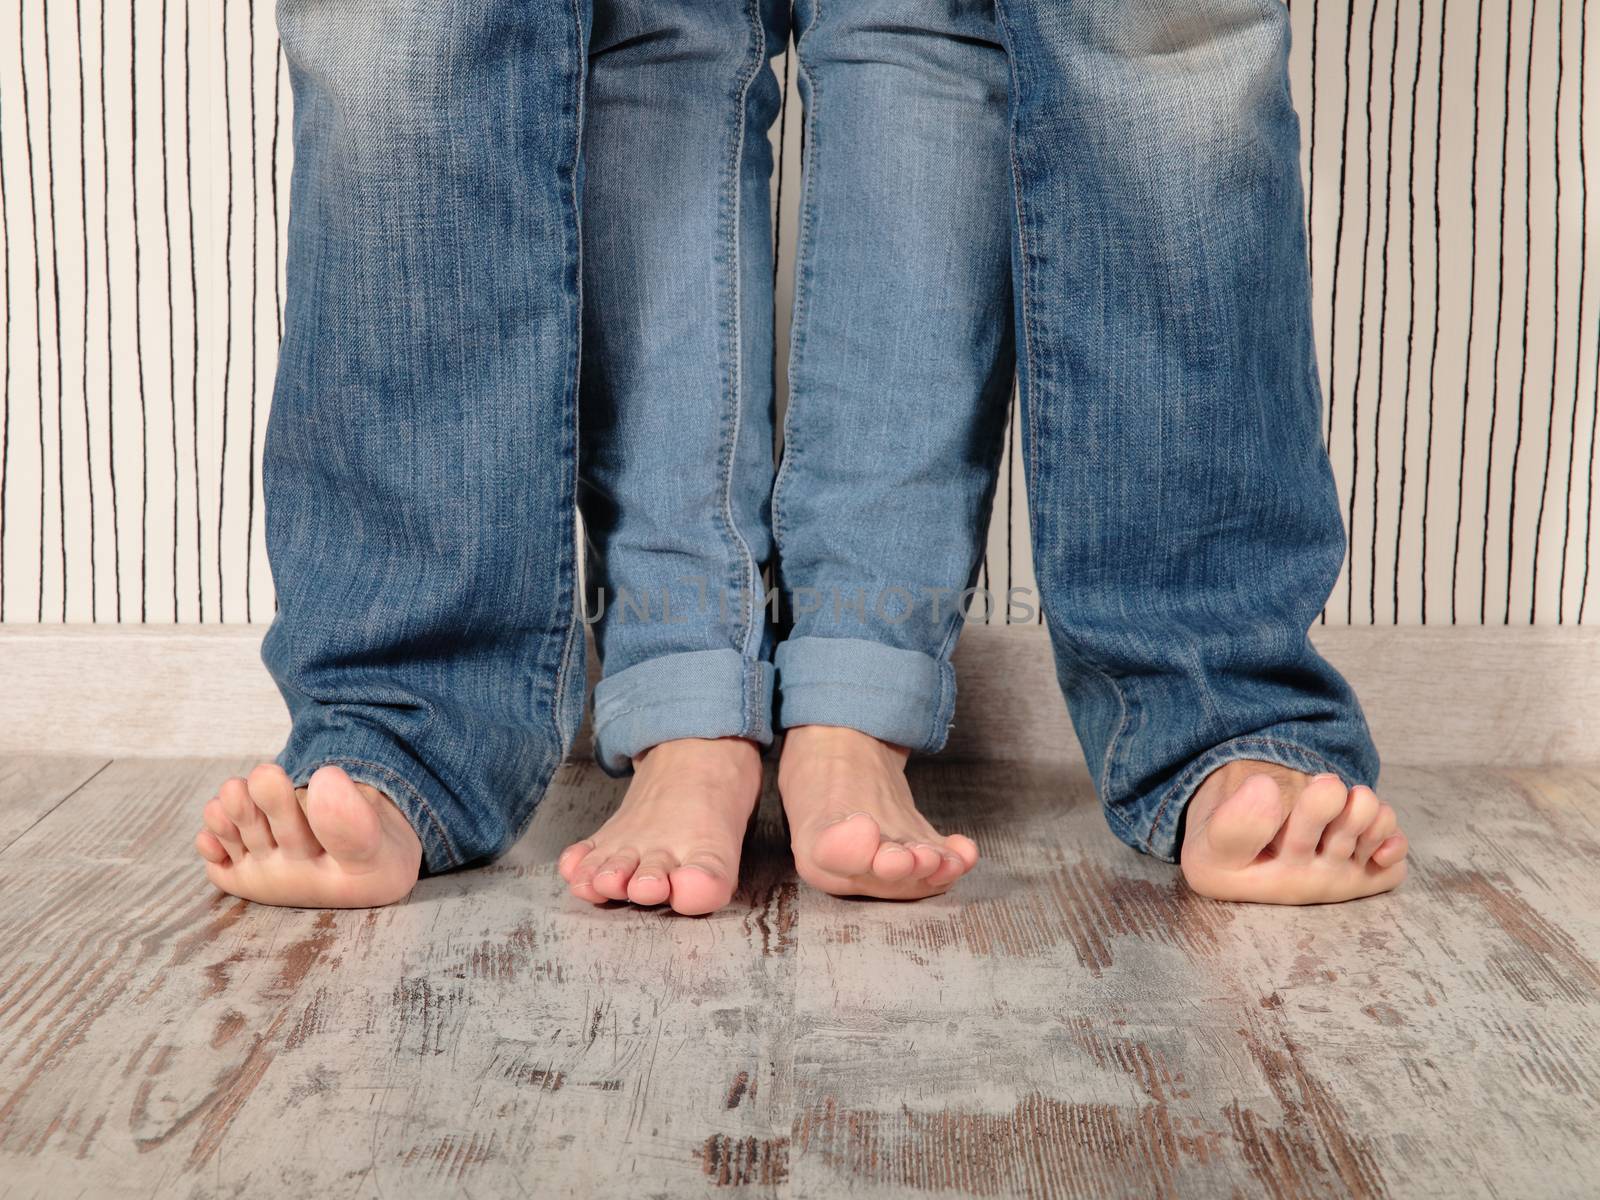 man and woman barefoot with jeans